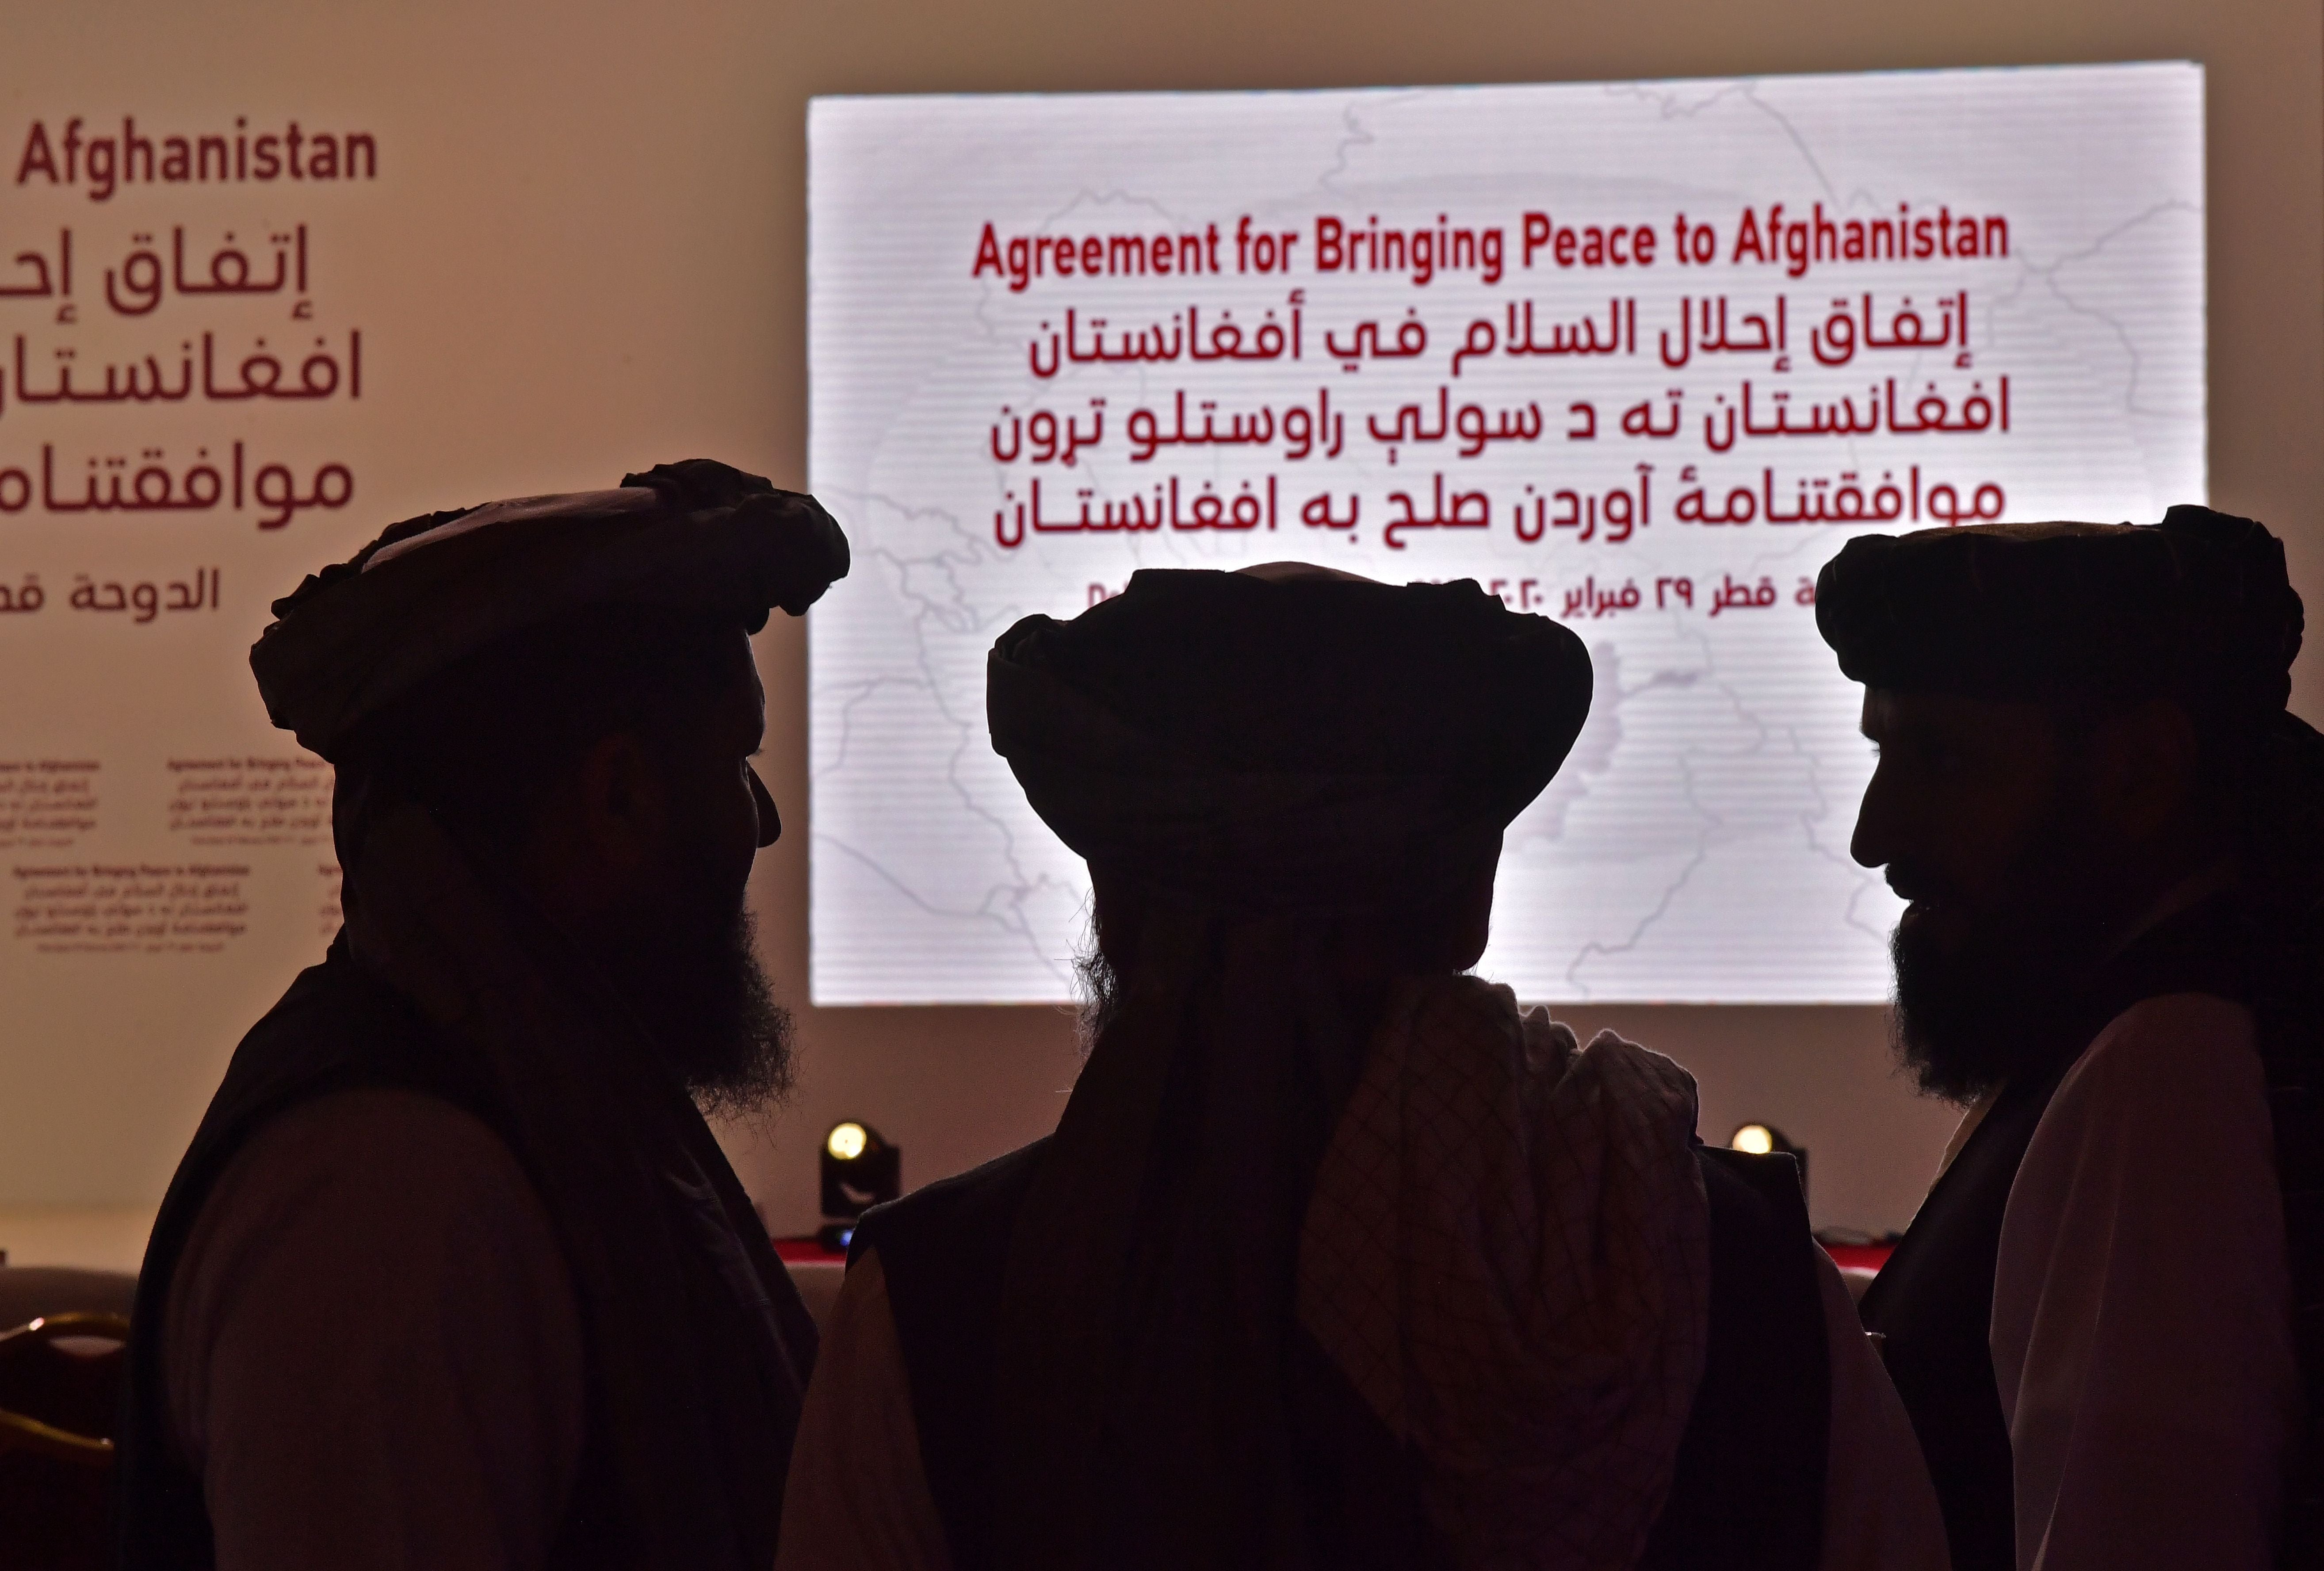 File: Members of the Taliban delegation gather ahead of the signing ceremony with the United States in the Qatari capital Doha in 2020